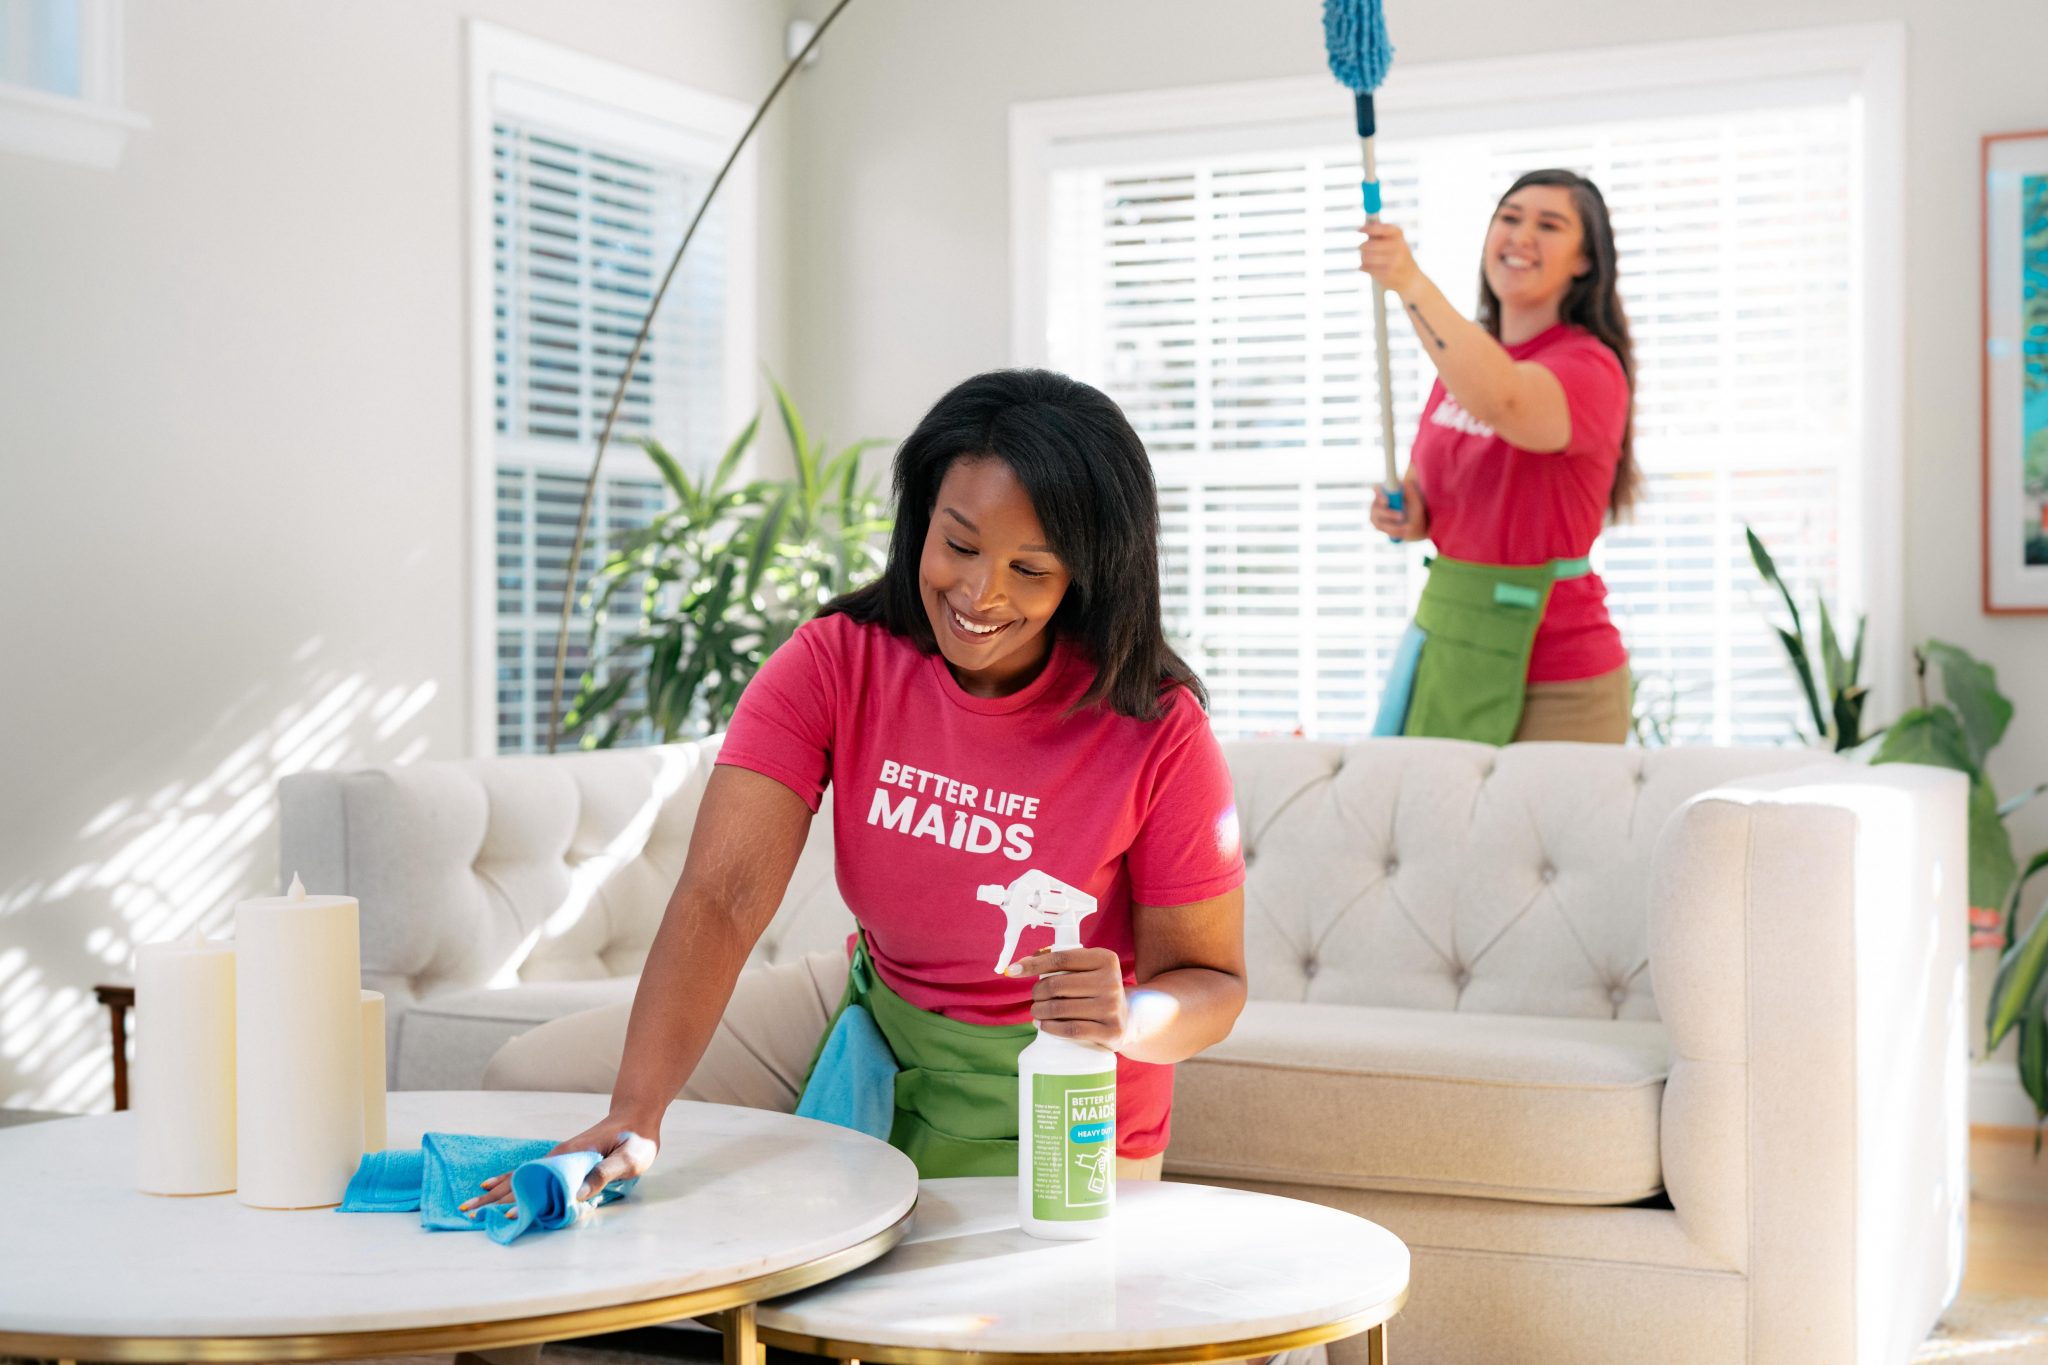 better life maids, house cleaning in st Peters, house cleaning near me, house cleaning near st Peters, best maids in st Peters, best maid service near me, top quality maids, residential cleaner, move out maids st Peters, green cleaning, eco cleaning